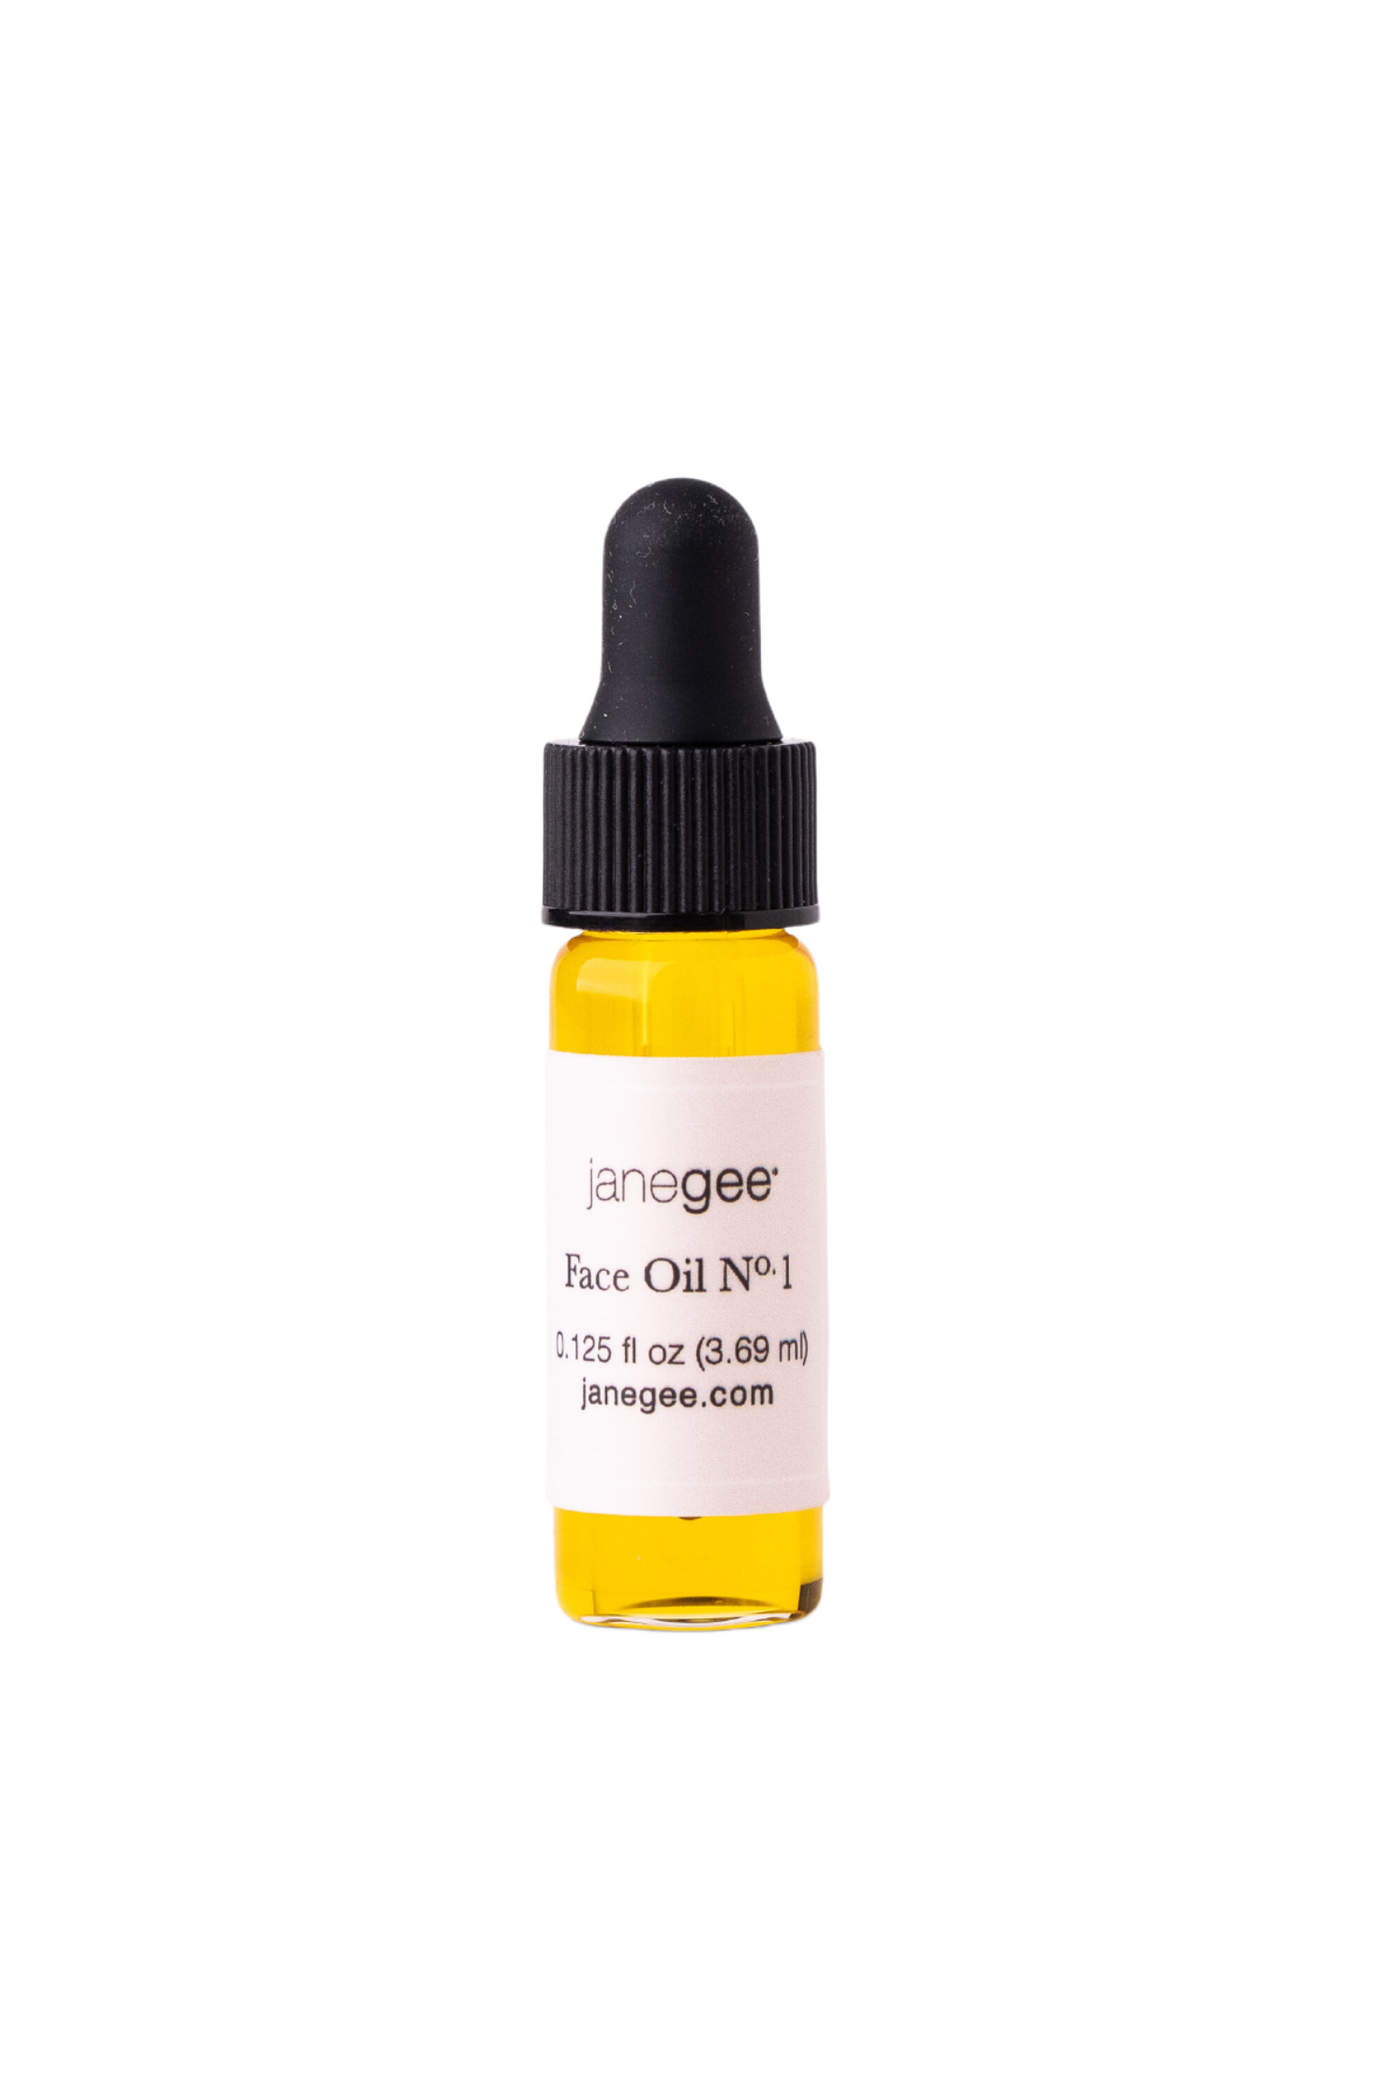 janegee Face Oil No.1 Sample